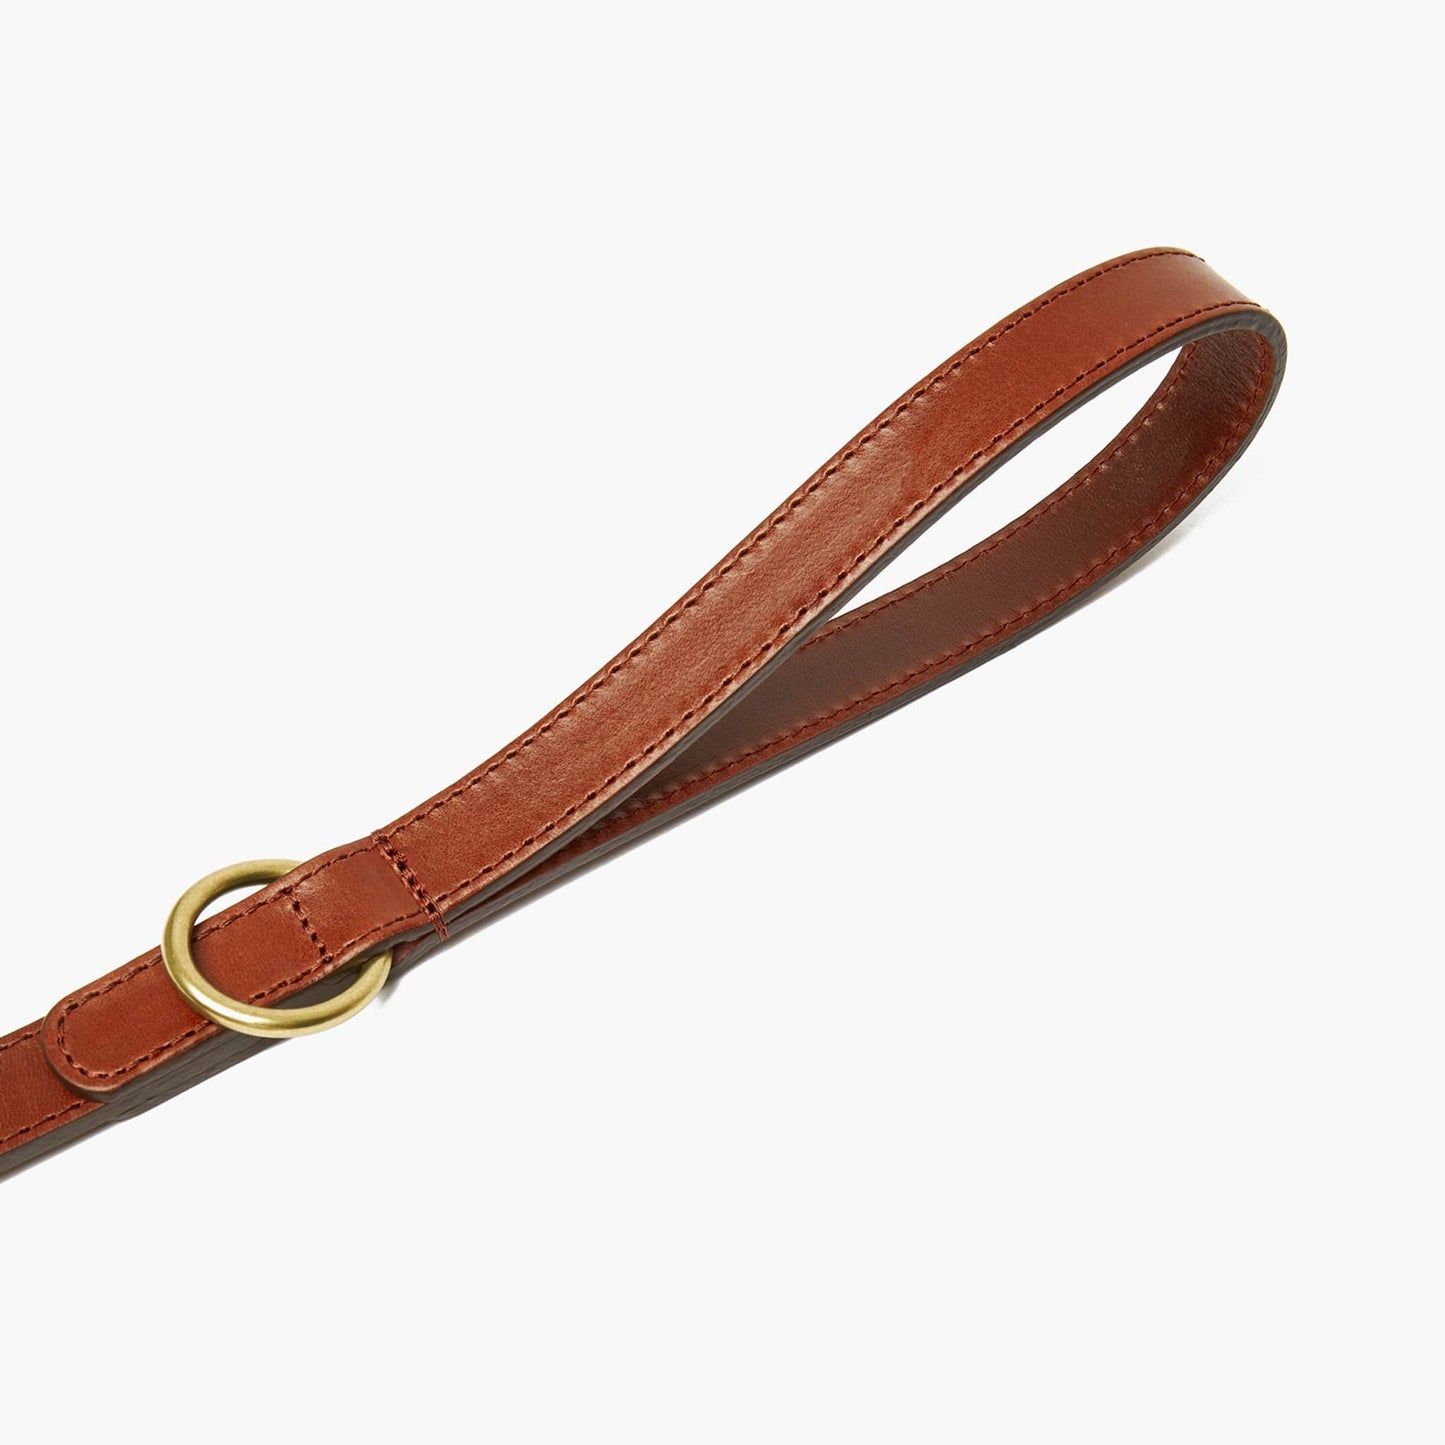 Autumn Maple Brown Leather Dog Collar with Gold Buckle